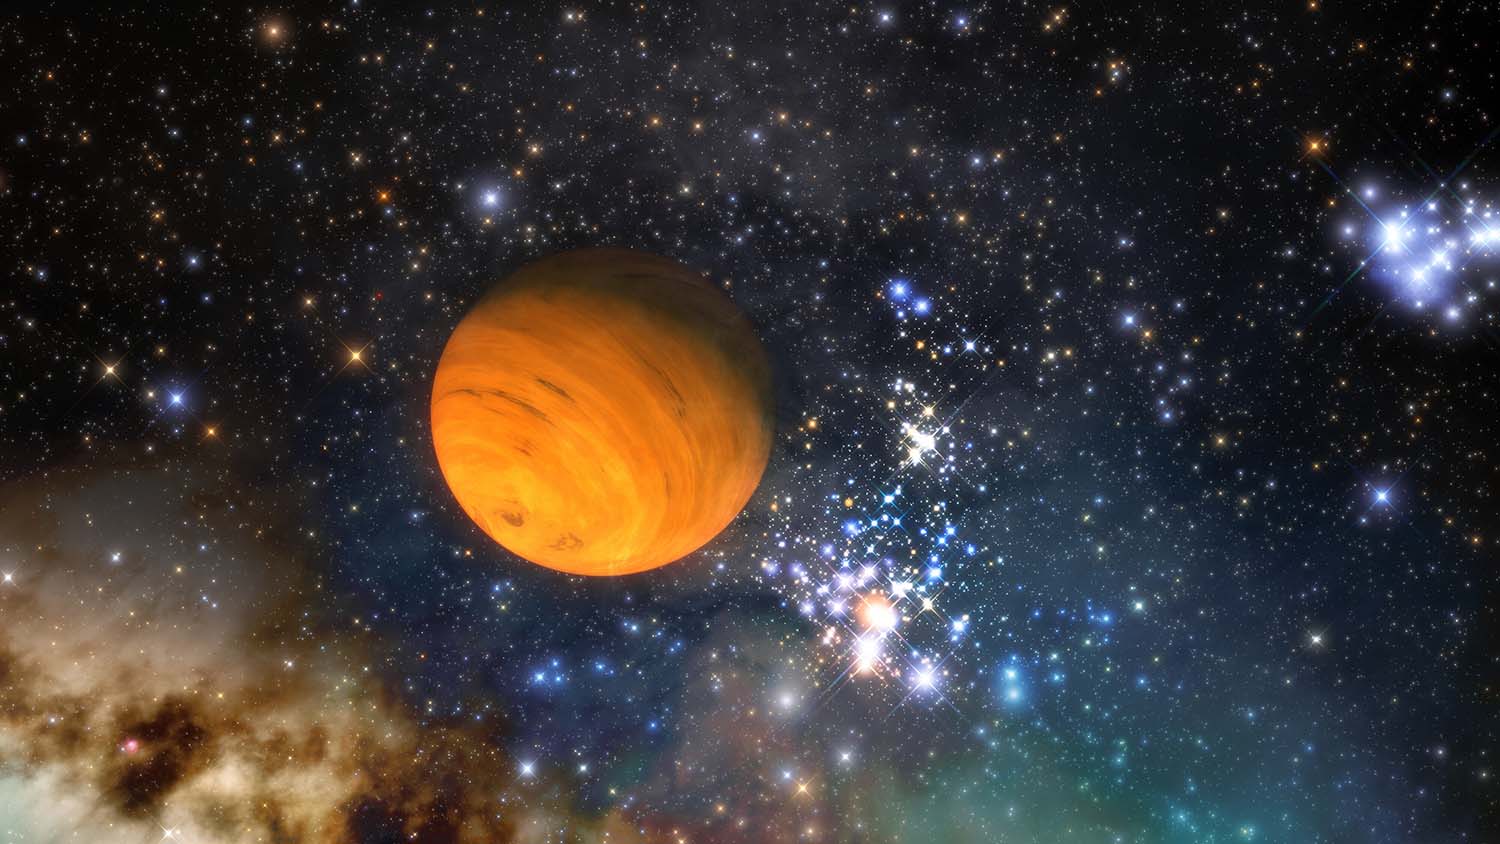 An artist's impression of a free-floating planet. Using observations and archival data from several of NSF's NOIRLab’s observatories, together with observations from telescopes around the world and in orbit, astronomers have discovered at least 70 new free-floating planets — planets that wander through space without a parent star — in a nearby region of the Milky Way known as Upper Scorpius OB stellar association.